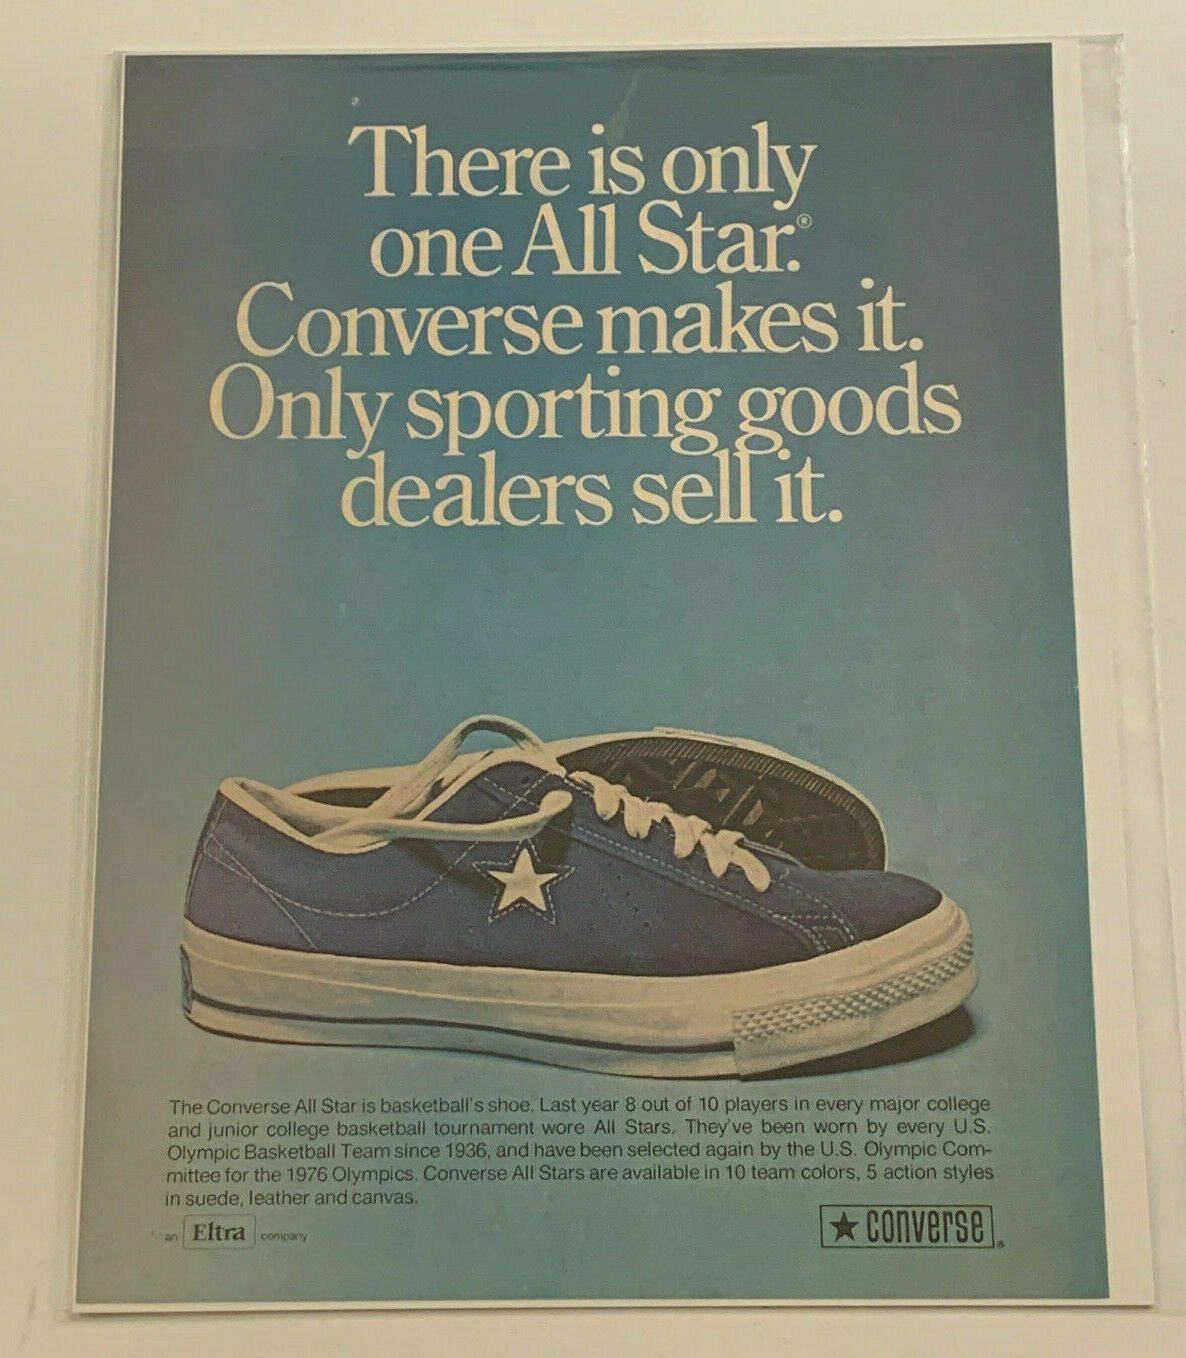 Converse All Star Basketball Shoes 1974 Sneakers Vintage Magazine Print Ad